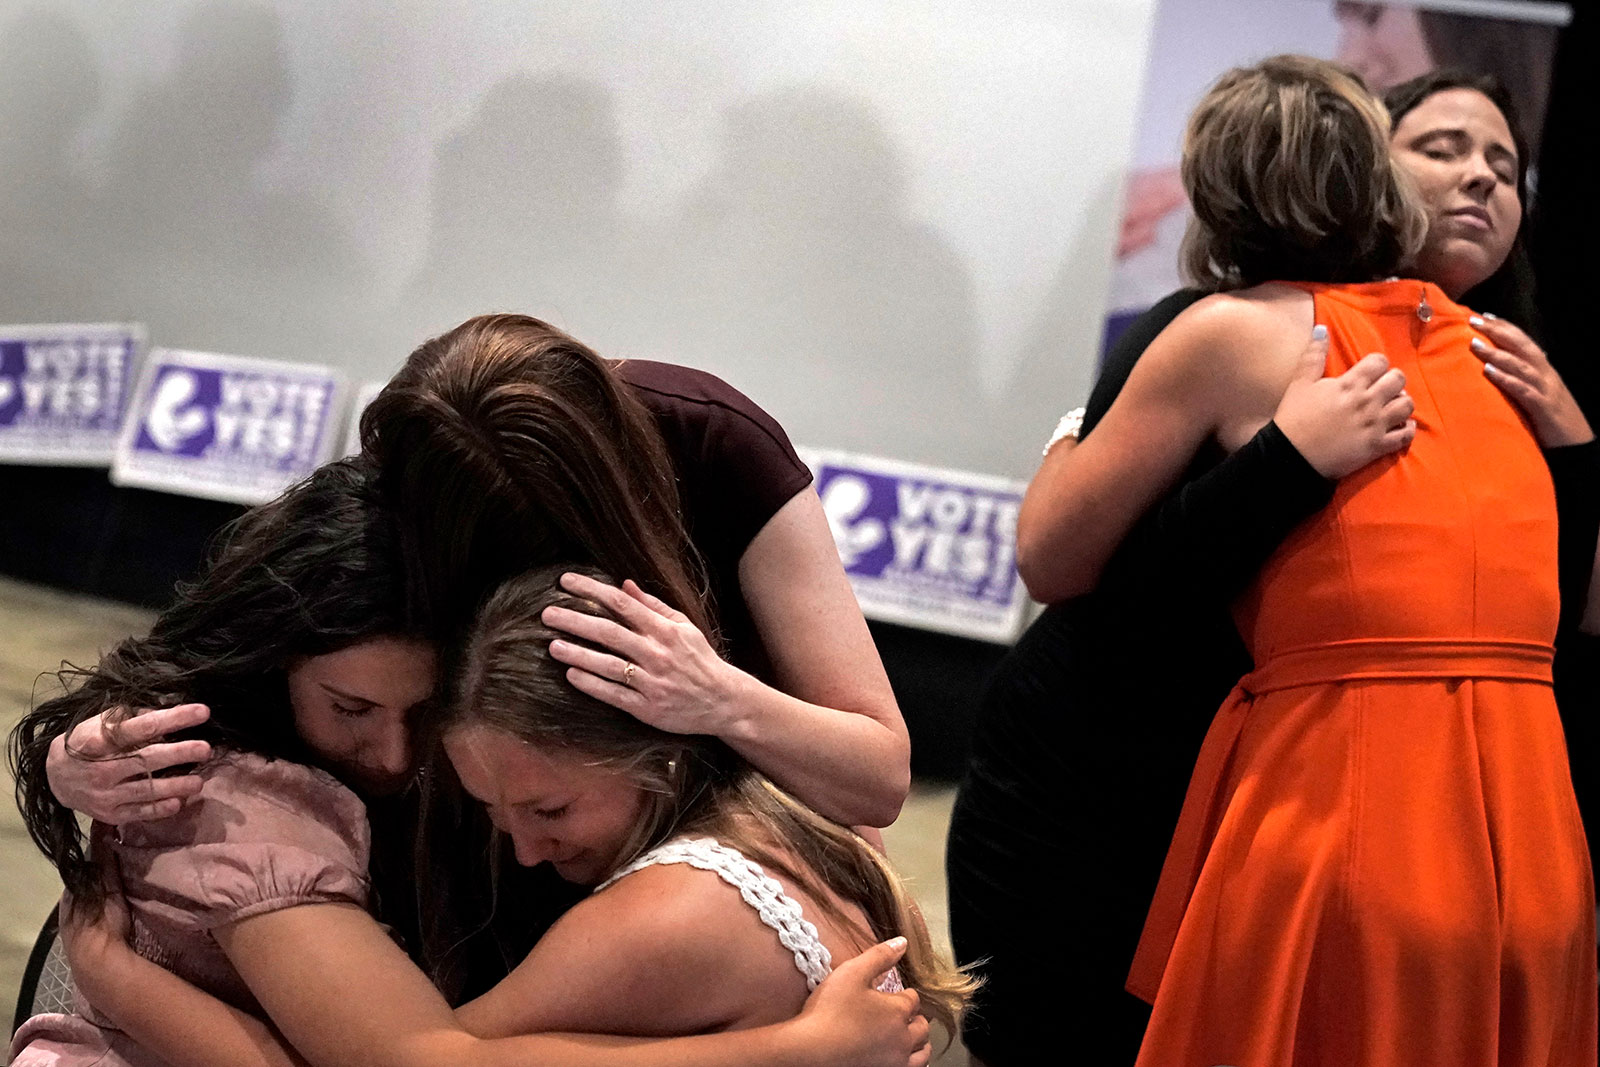 People hug during a "Value Them Both" watch party in Overland Park, Kansas, on Tuesday, August 2. 